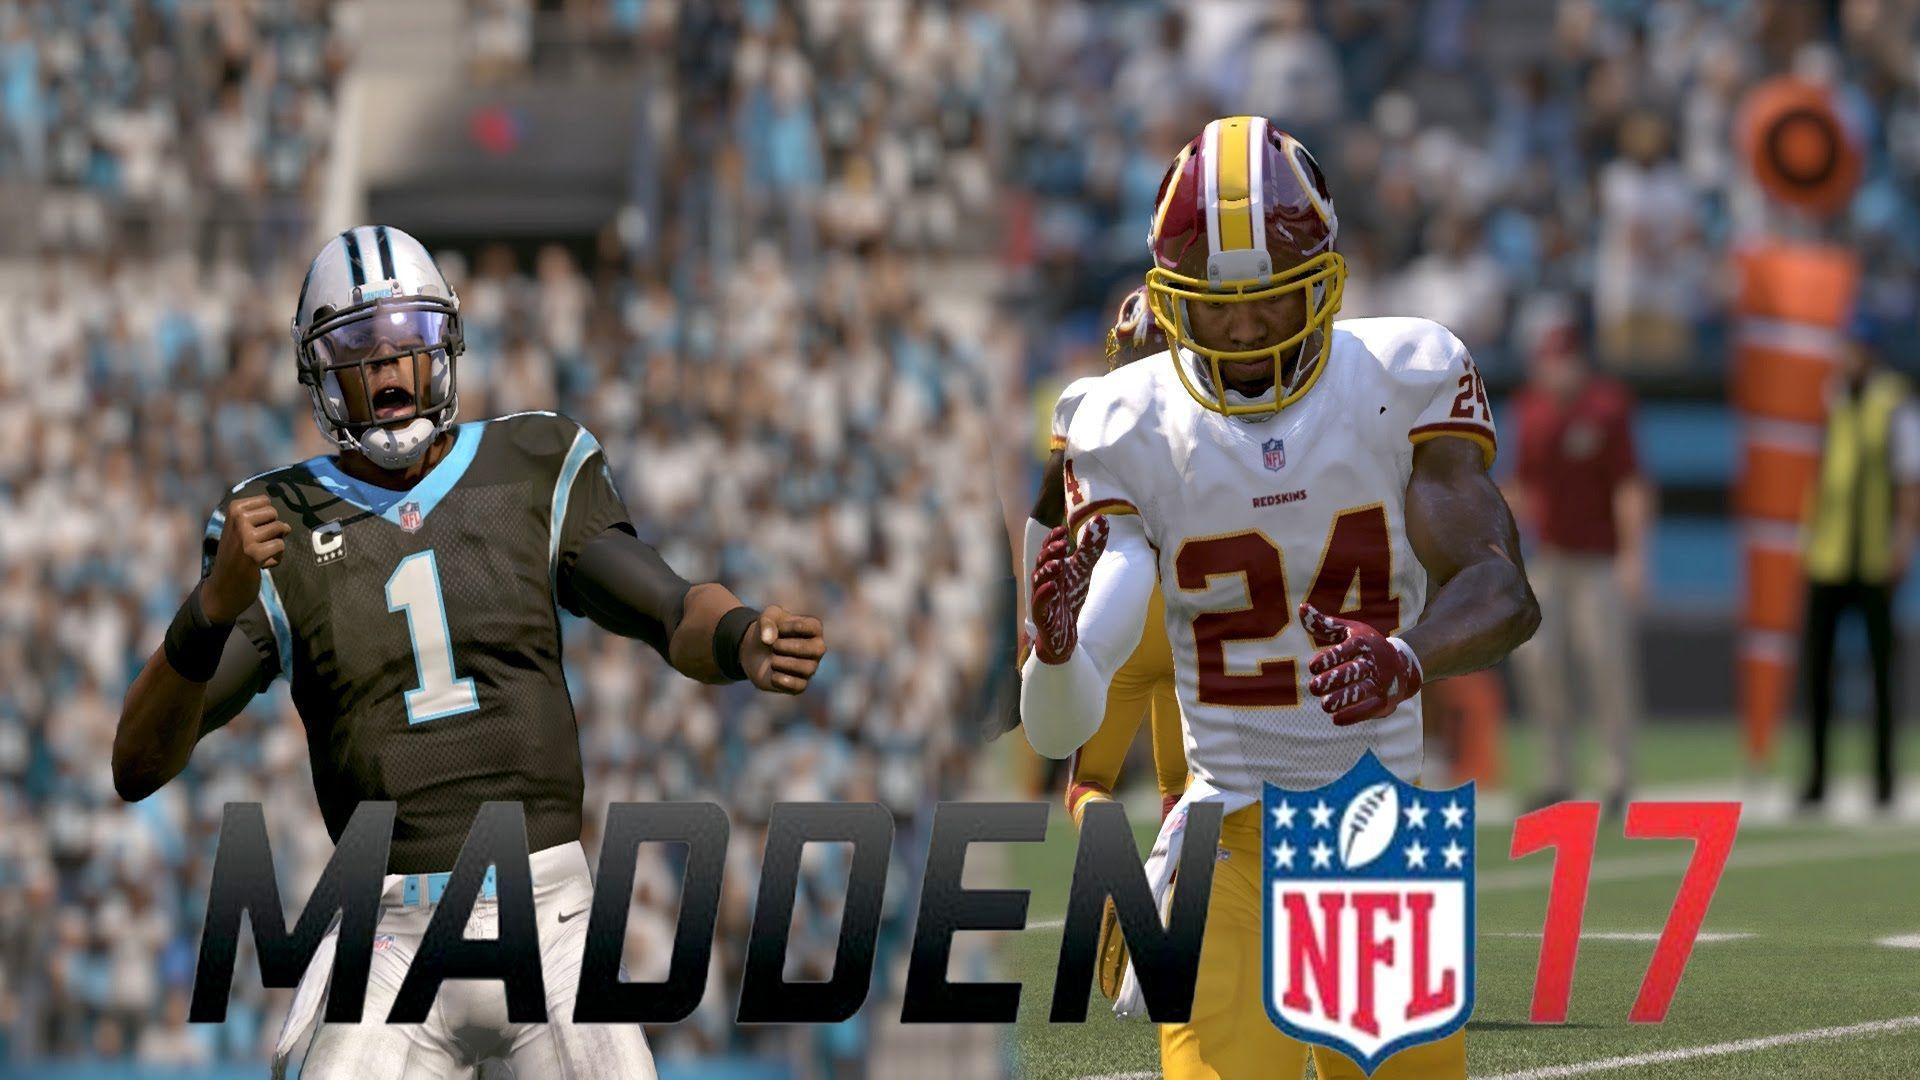 MADDEN NFL 17 OFFICIAL EARLY GAMEPLAY! CAROLINA PANTHERS VS